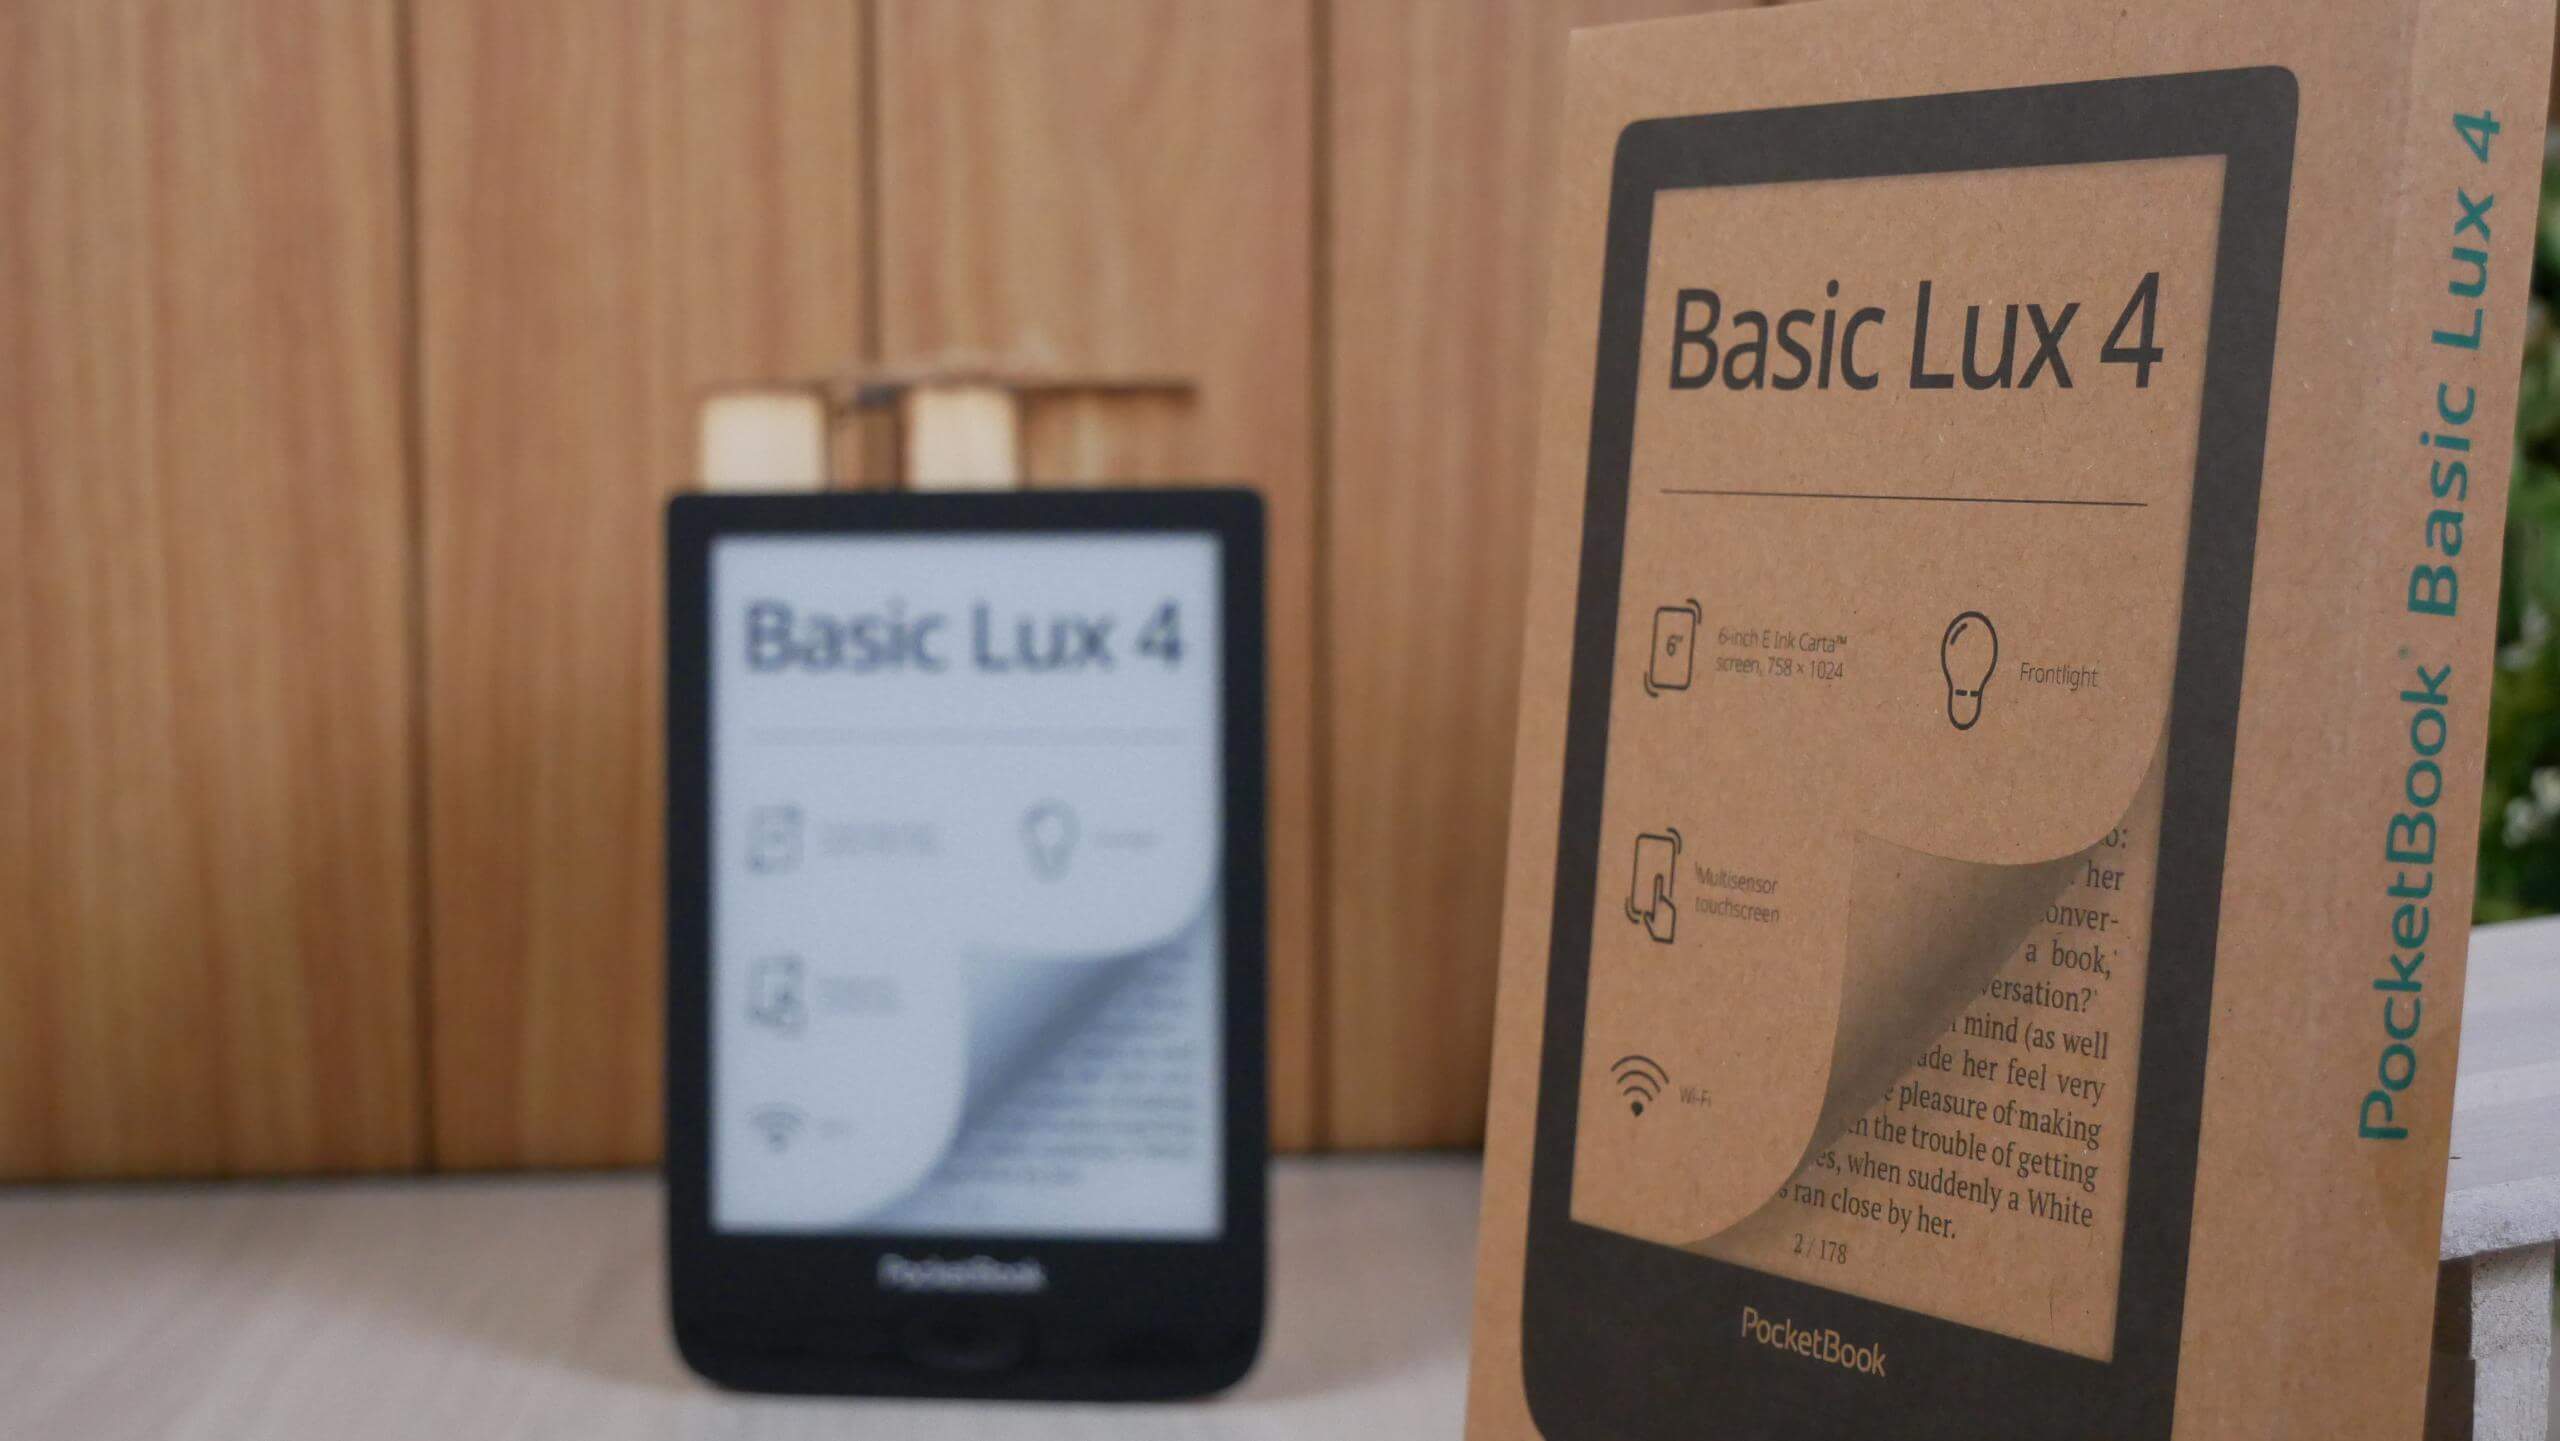 First look at Pocketbook Lux the Basic Good - 4 e-Reader